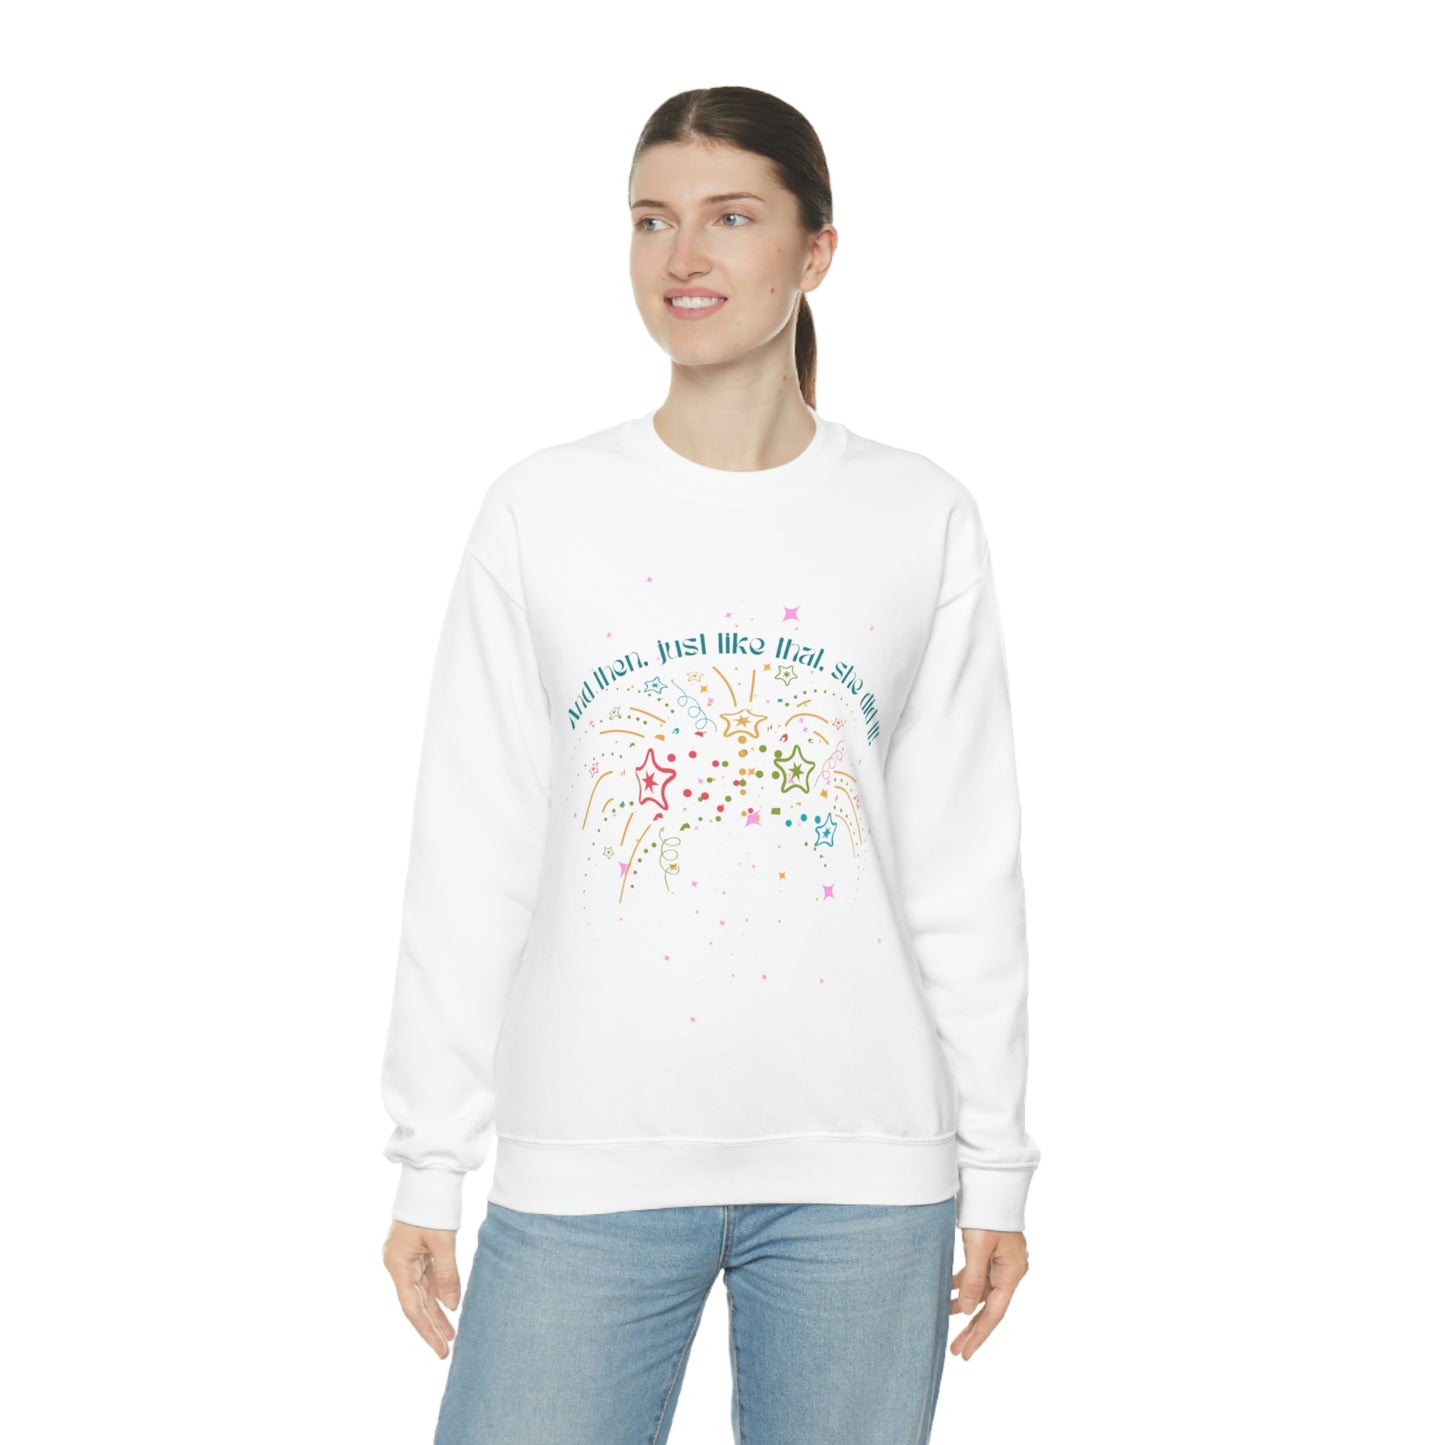 ‘And then, just like that, she did it! ‘  Printed Front & Back.  Unisex Heavy Blend™ Crewneck Sweatshirt